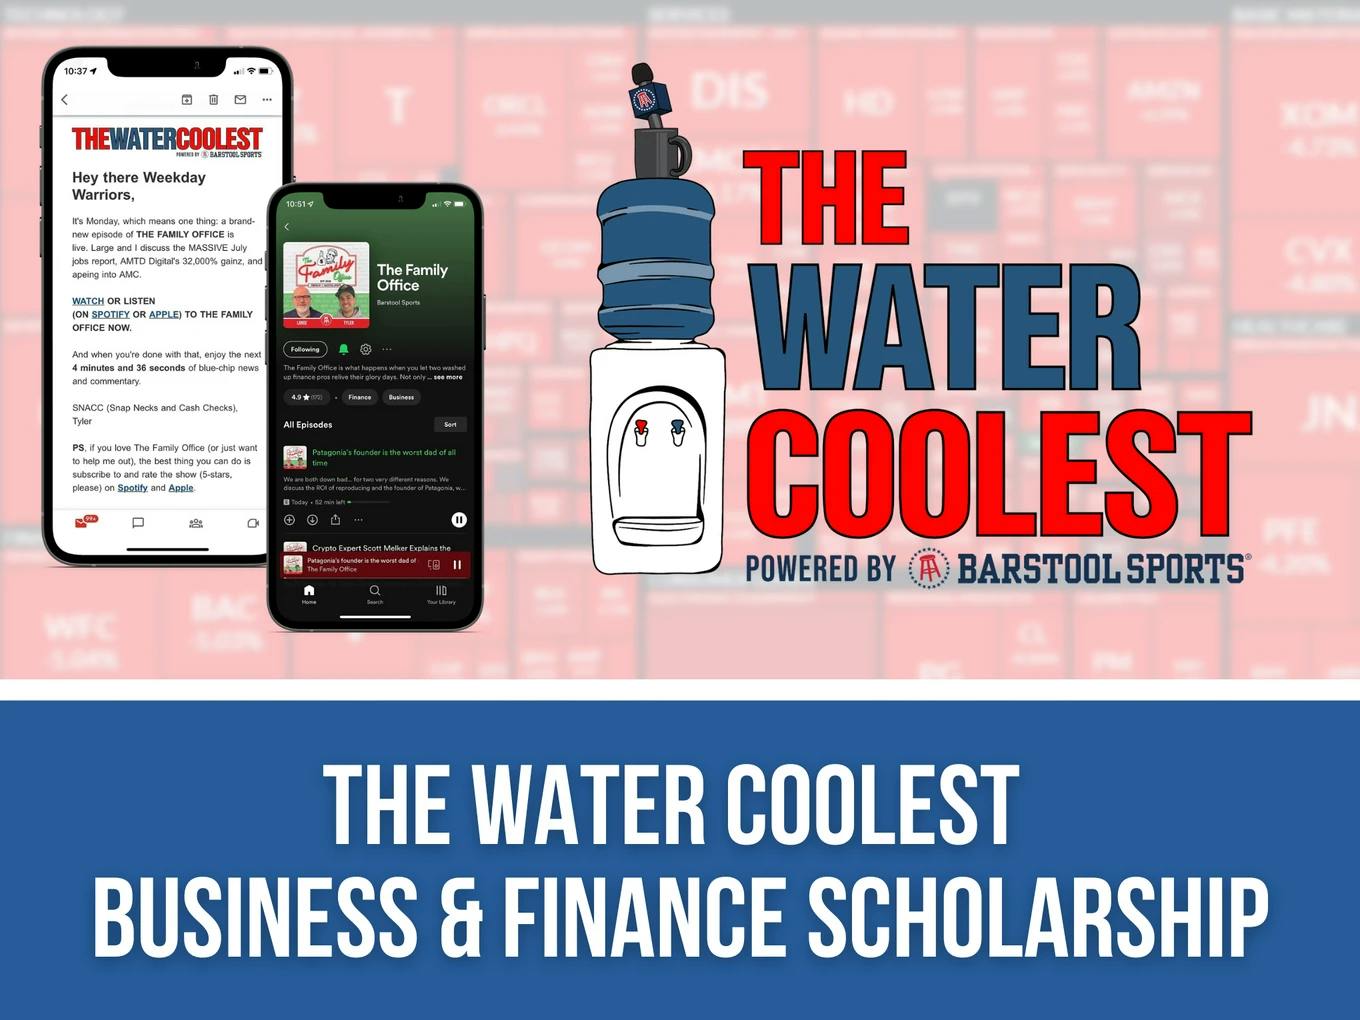 Water Coolest Powered by Barstool Sports Business & Finance Scholarship